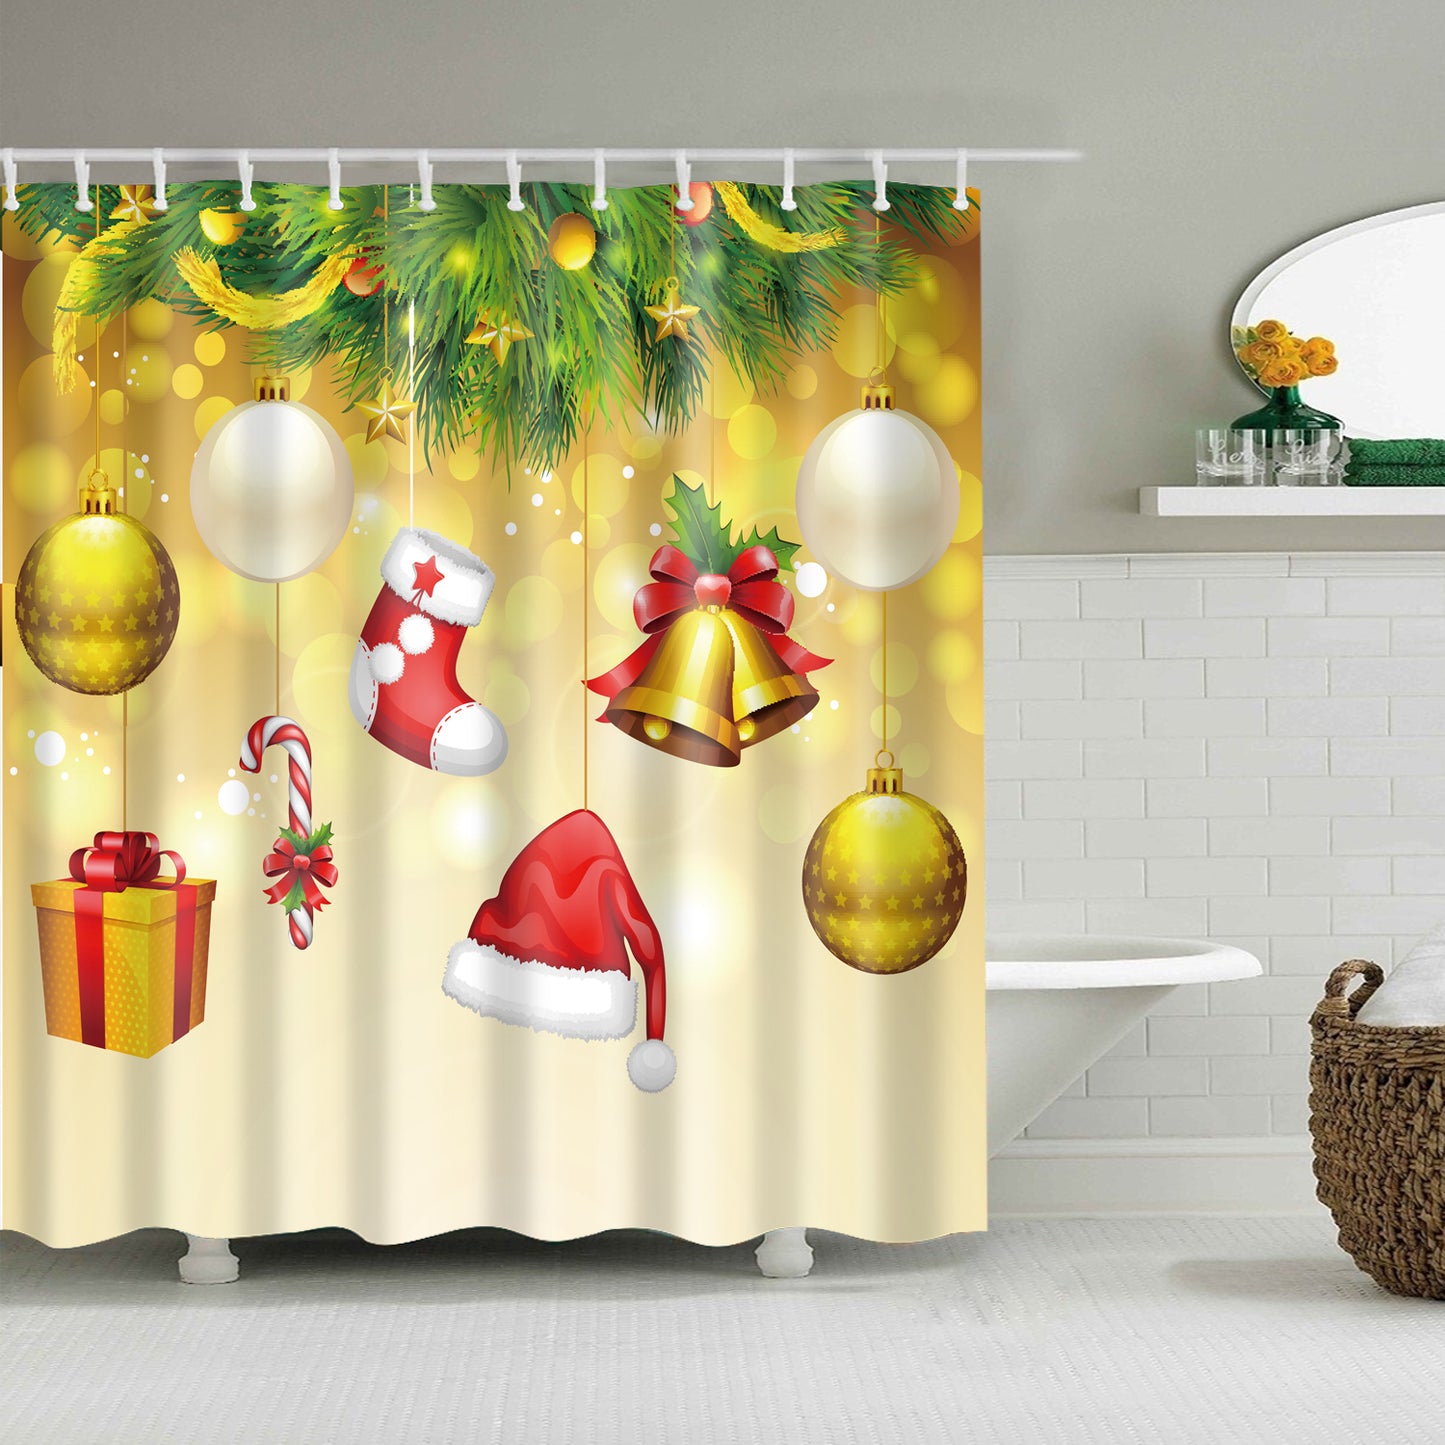 Golden Backdrop Hanging Christmas Ornament Shower Curtain